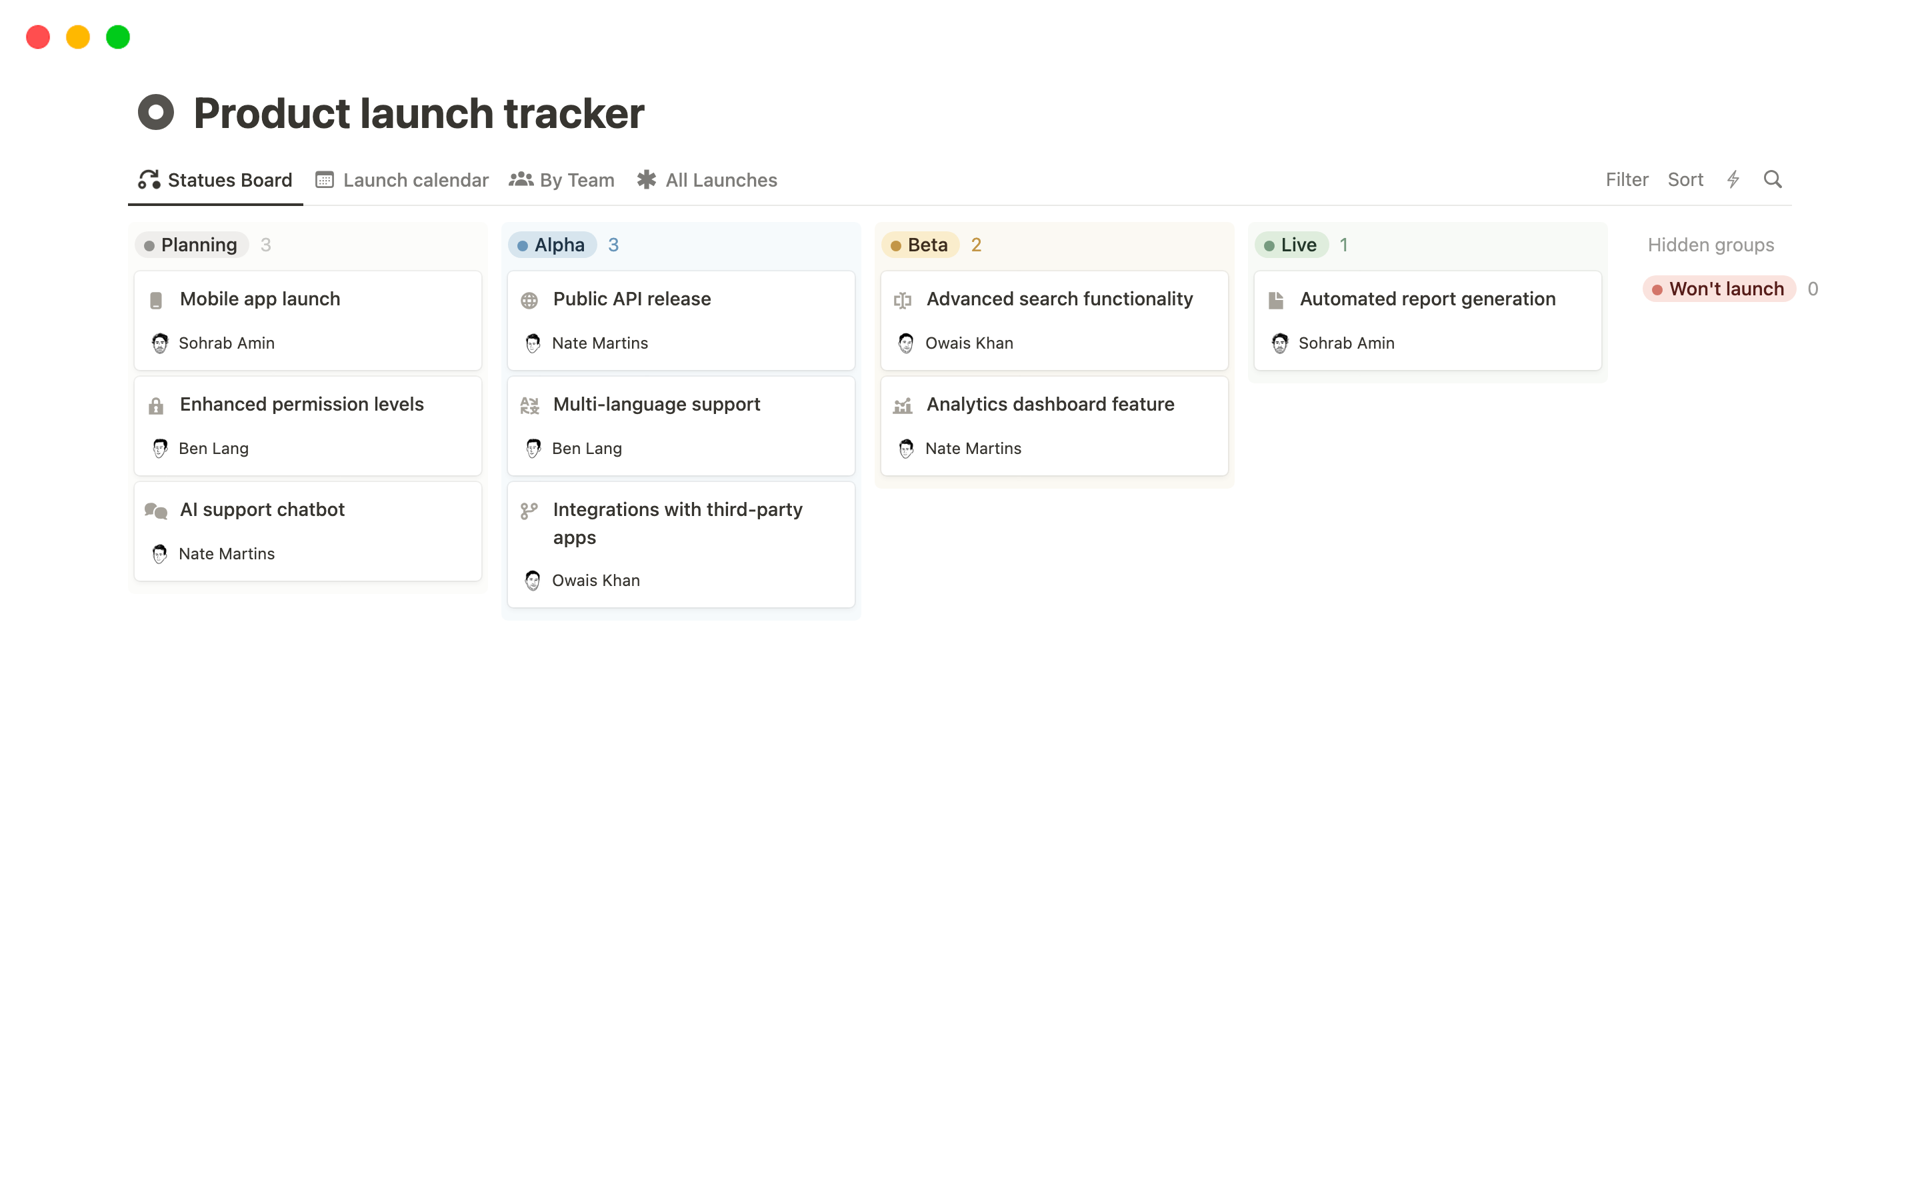 Prepare for your product launch by building context and tracking project tasks with our Product Launch Tracker template.